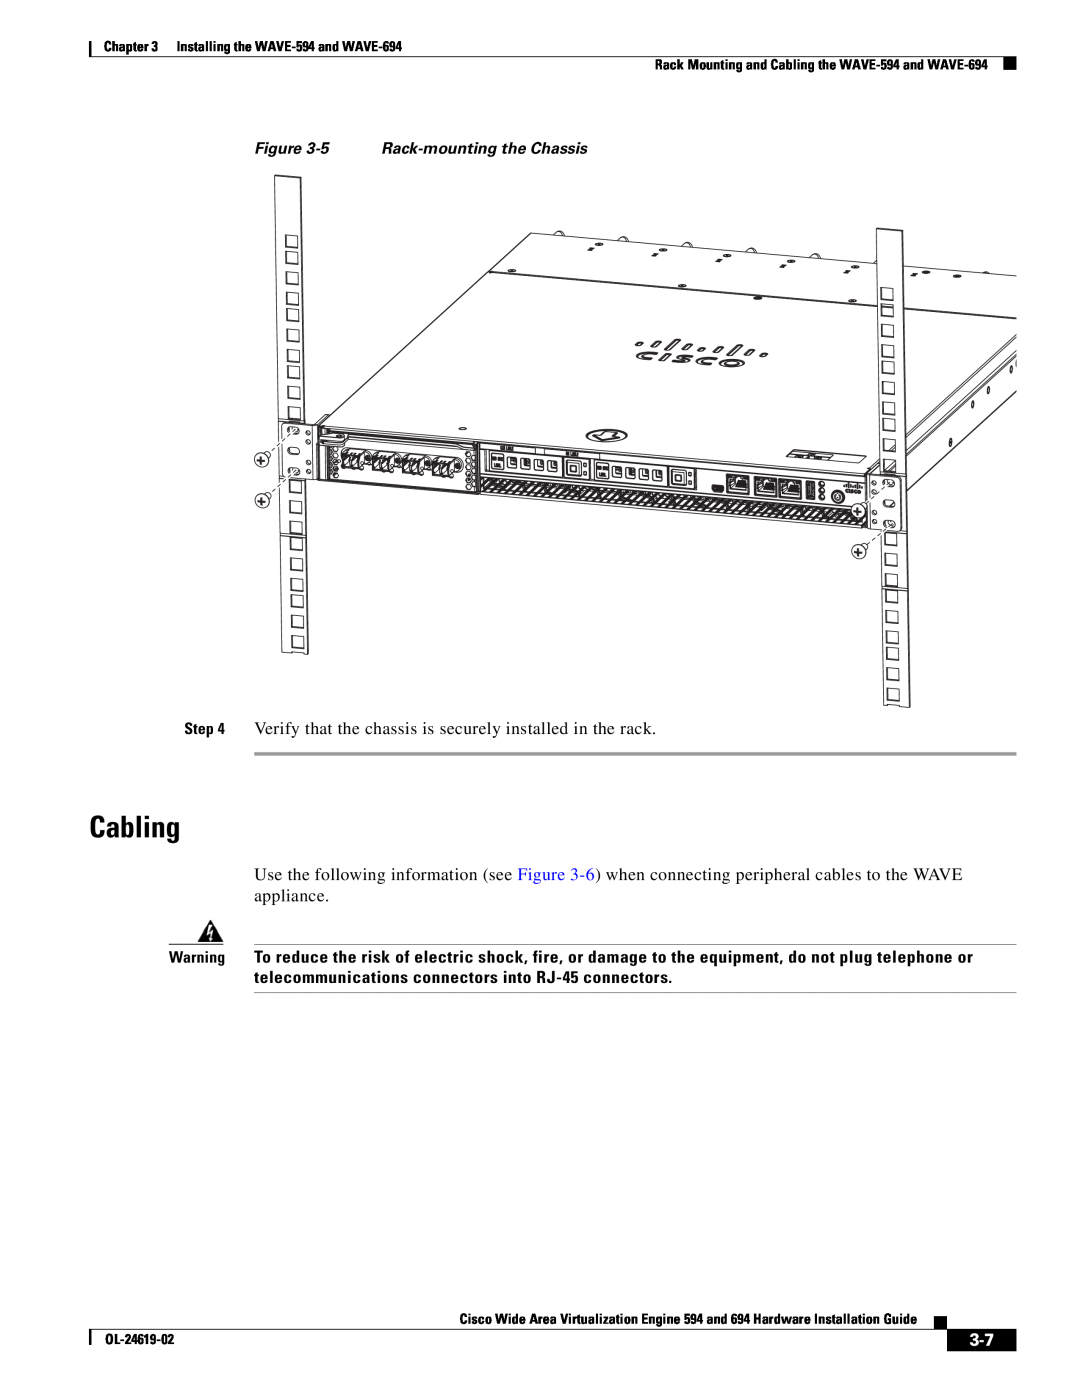 Cisco Systems WAVE594K9 manual Cabling, 5 Rack-mounting the Chassis, Installing the WAVE-594 and WAVE-694, OL-24619-02 